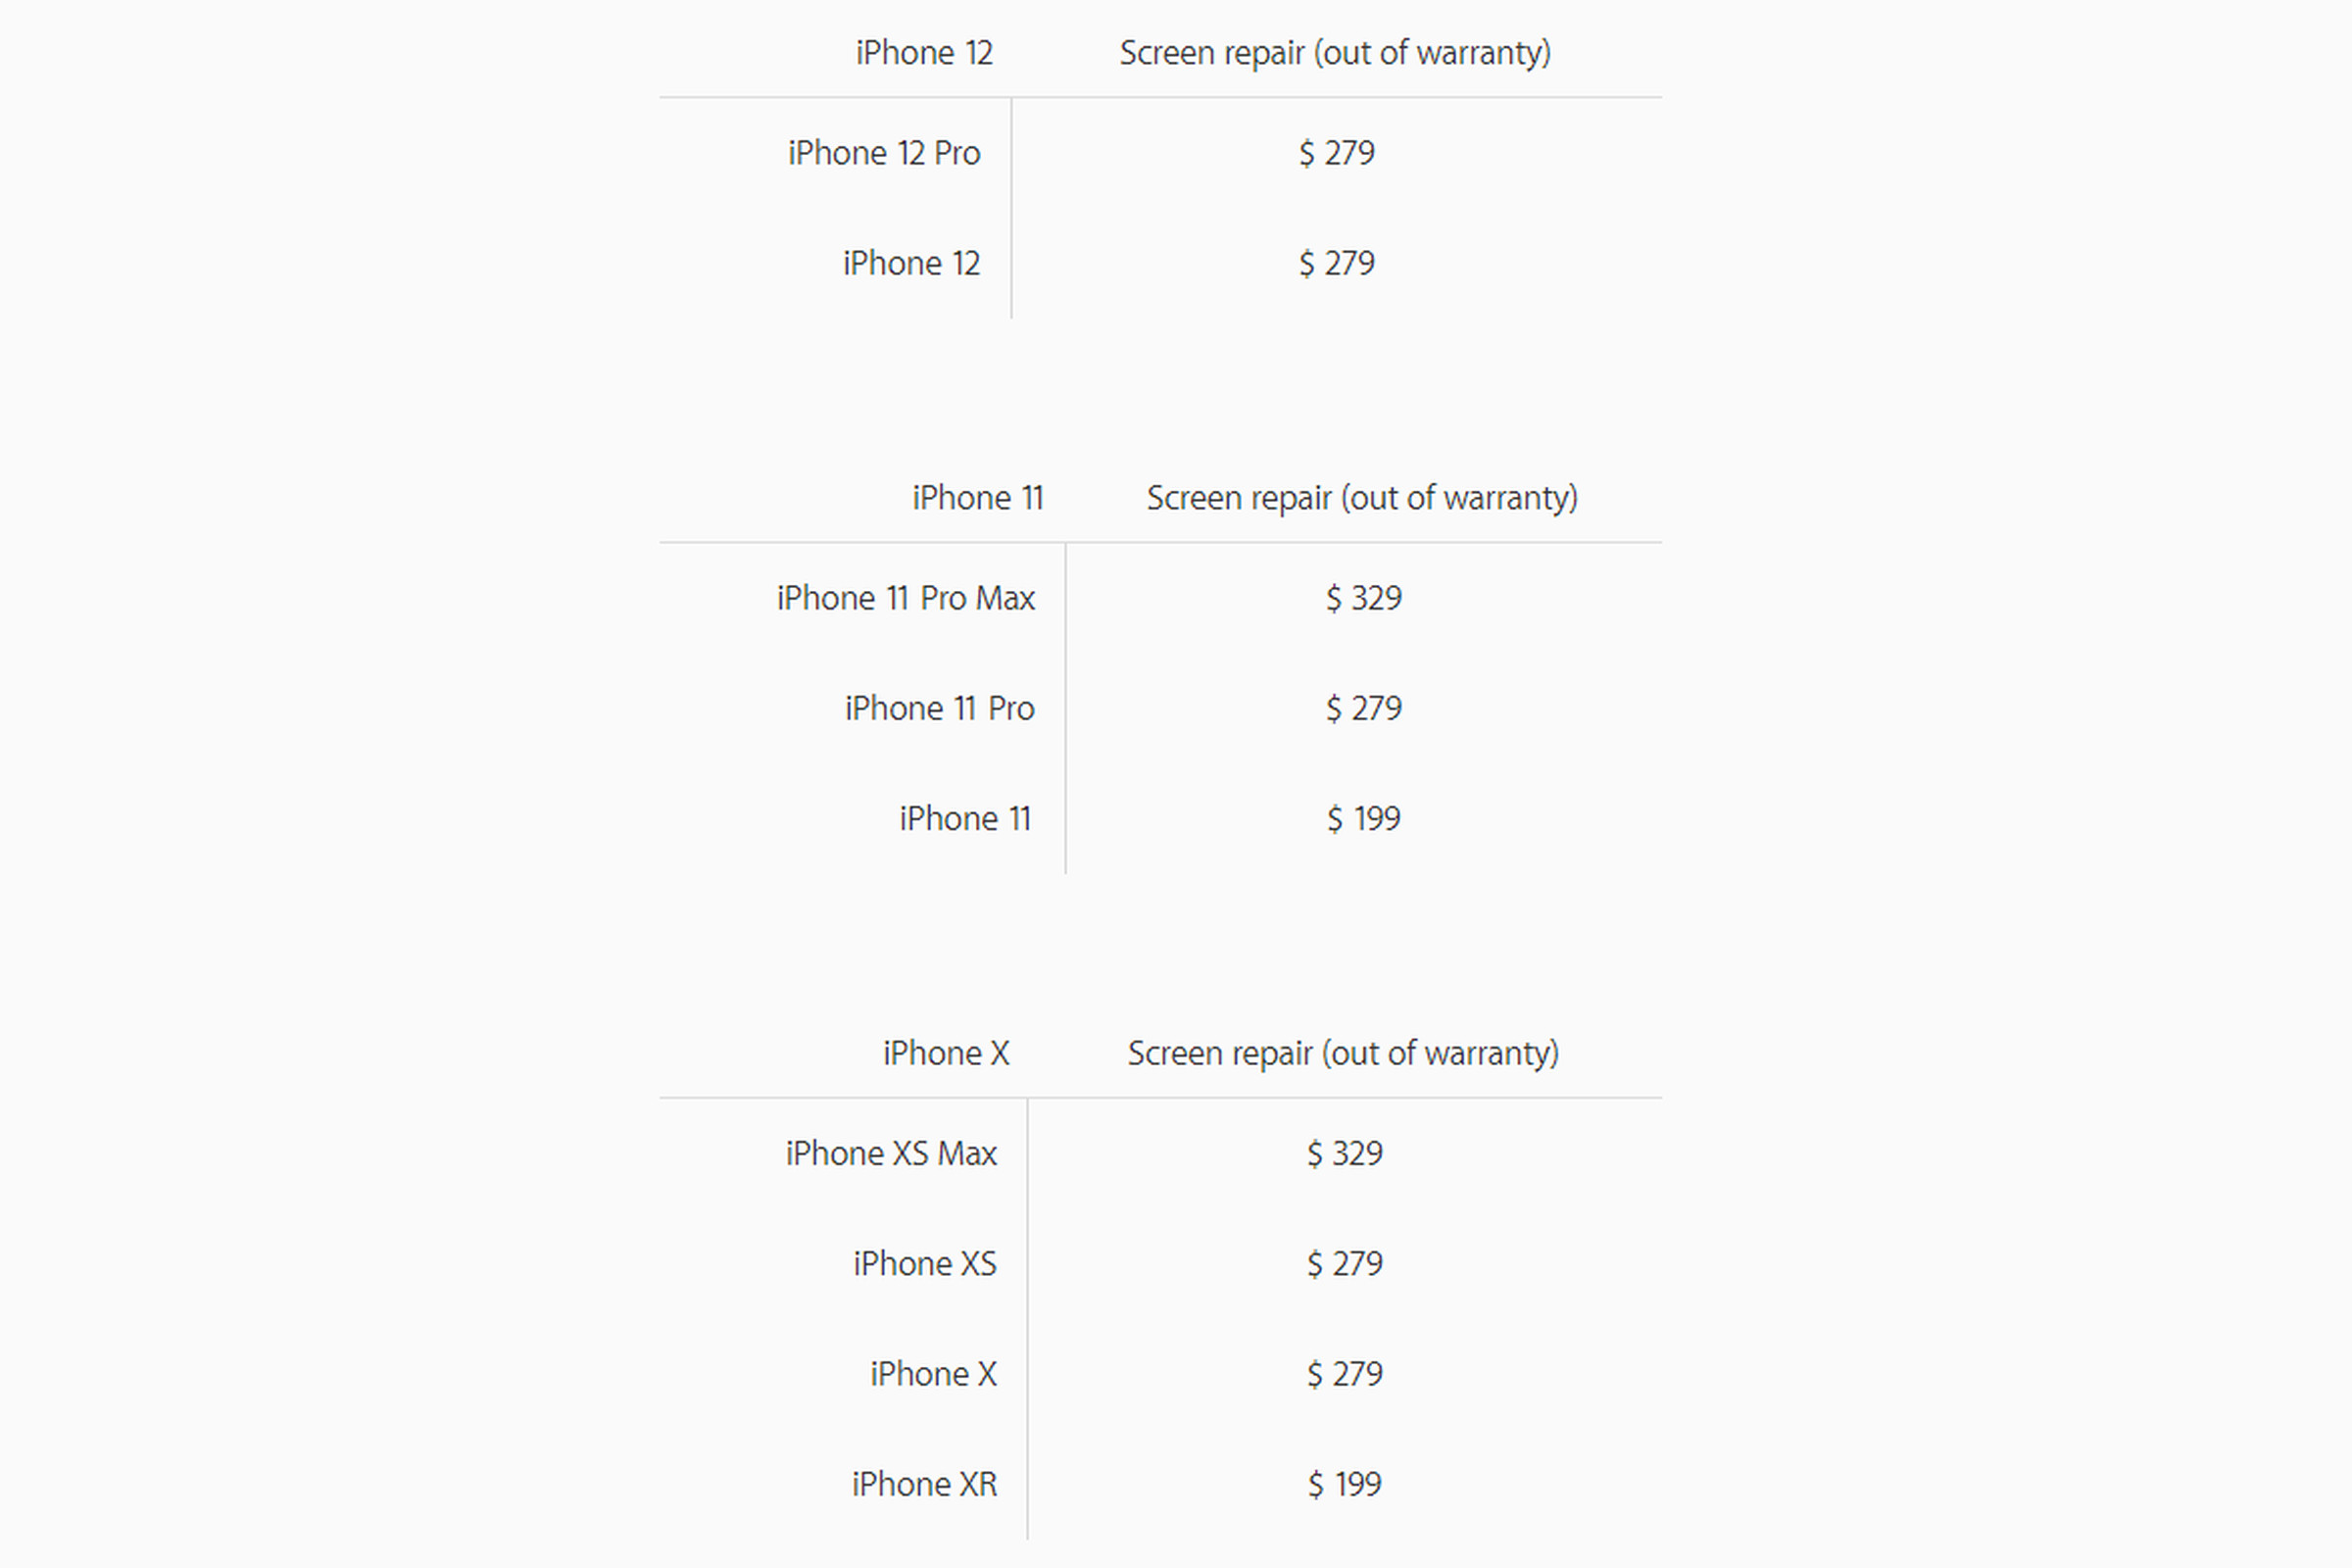 Apple’s site gives a comparison of screen repair costs across its lineup.